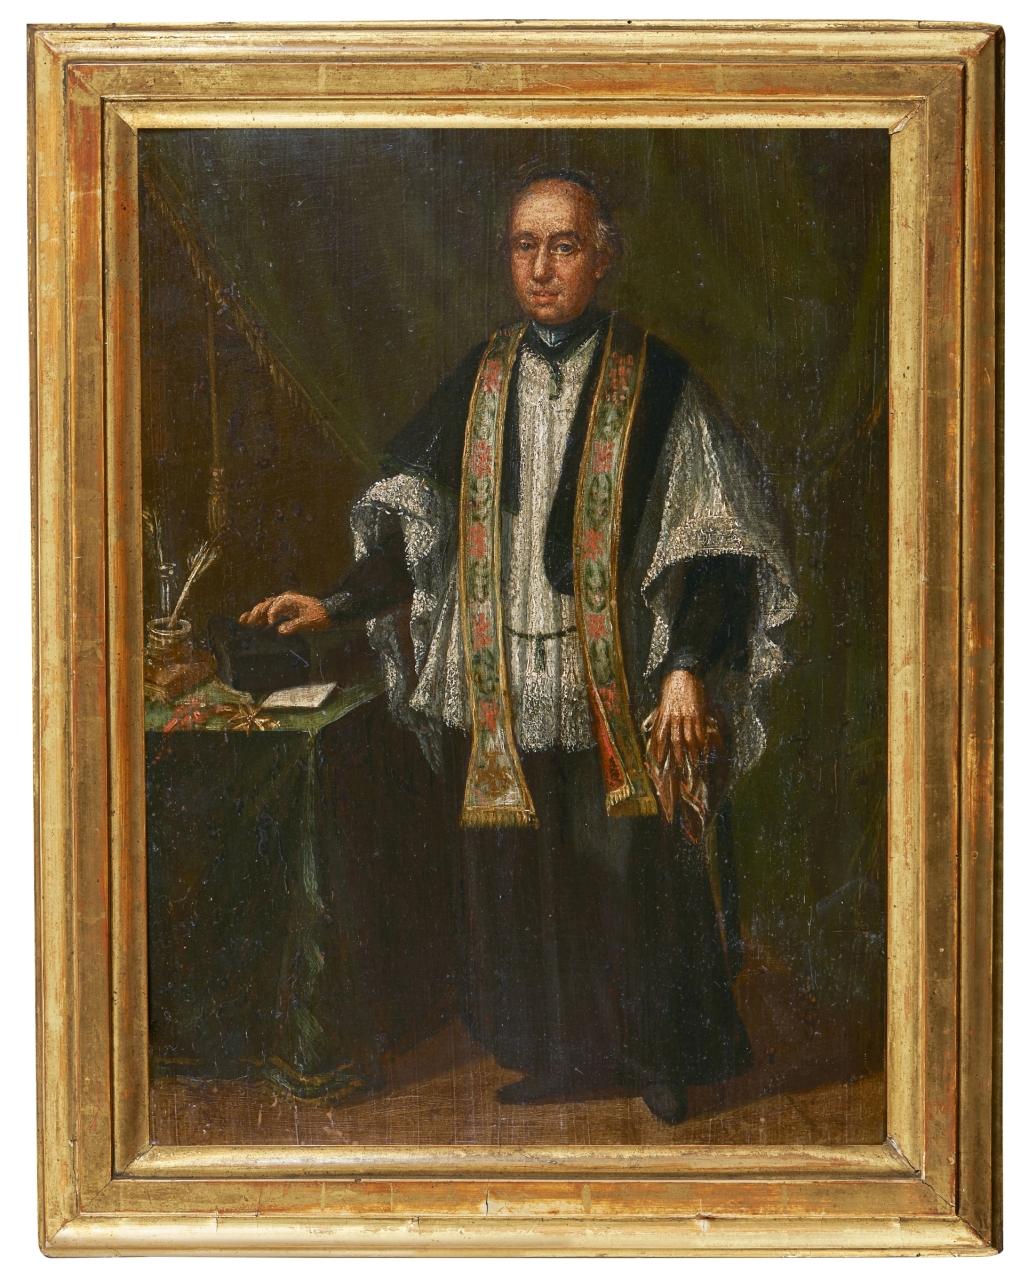 Probably this painting was a sketch for a larger canvas or table and served as a tribute to this bishop, portrayed in a very important phase of his life, probably a career advancement.
To underline the beauty of Venetian painting; even when the